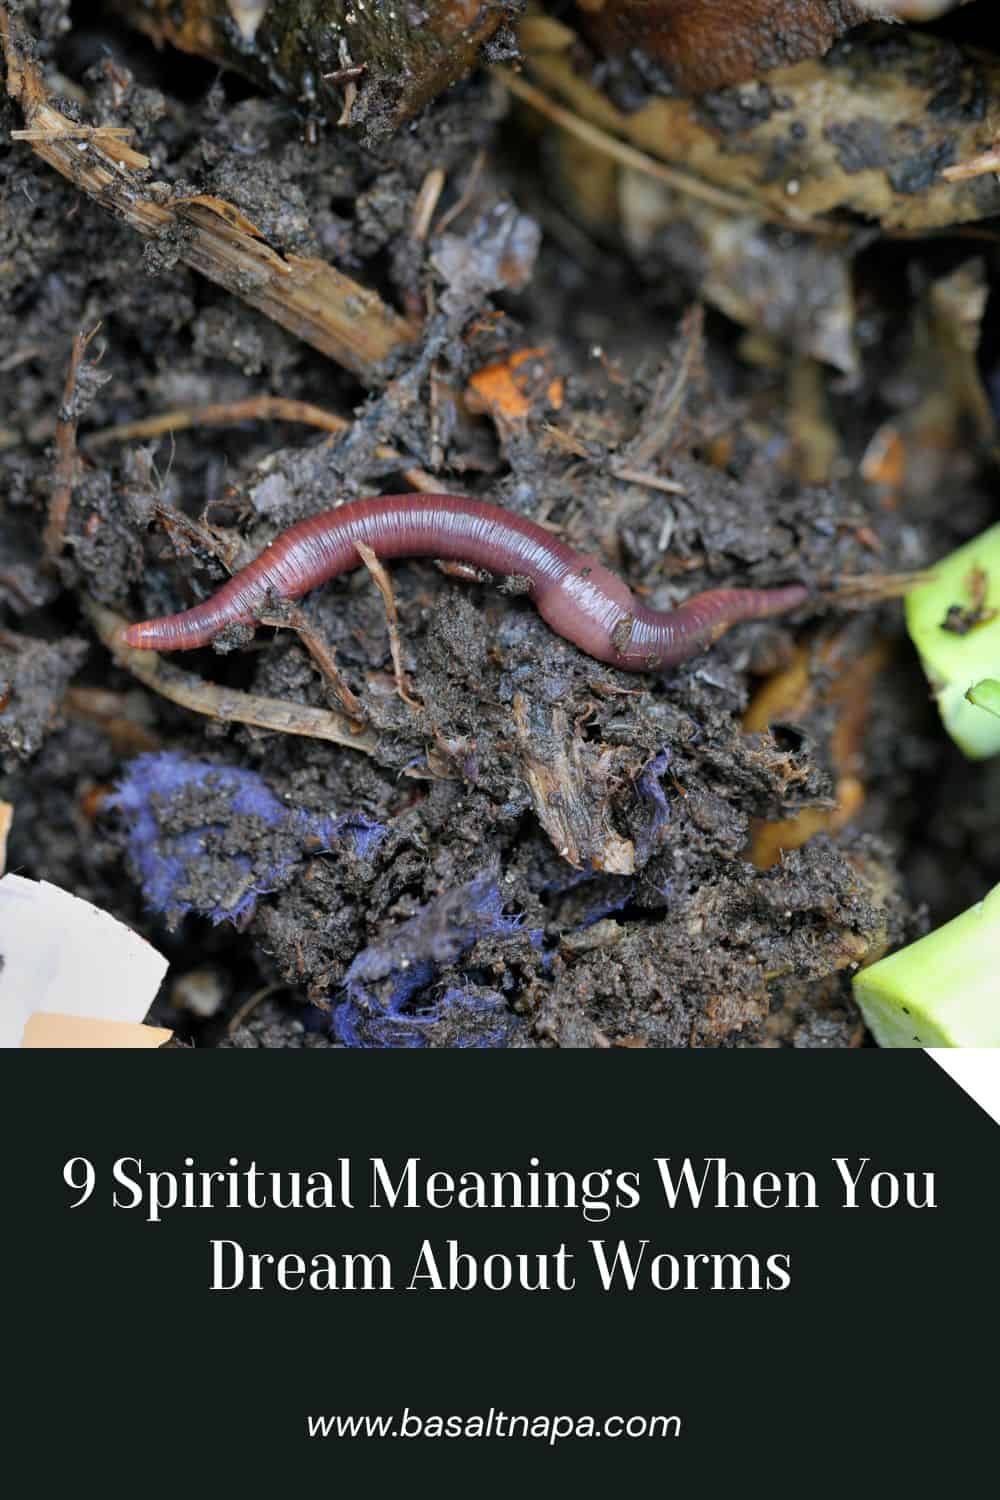 9 Spiritual Meanings When You Dream About Worms